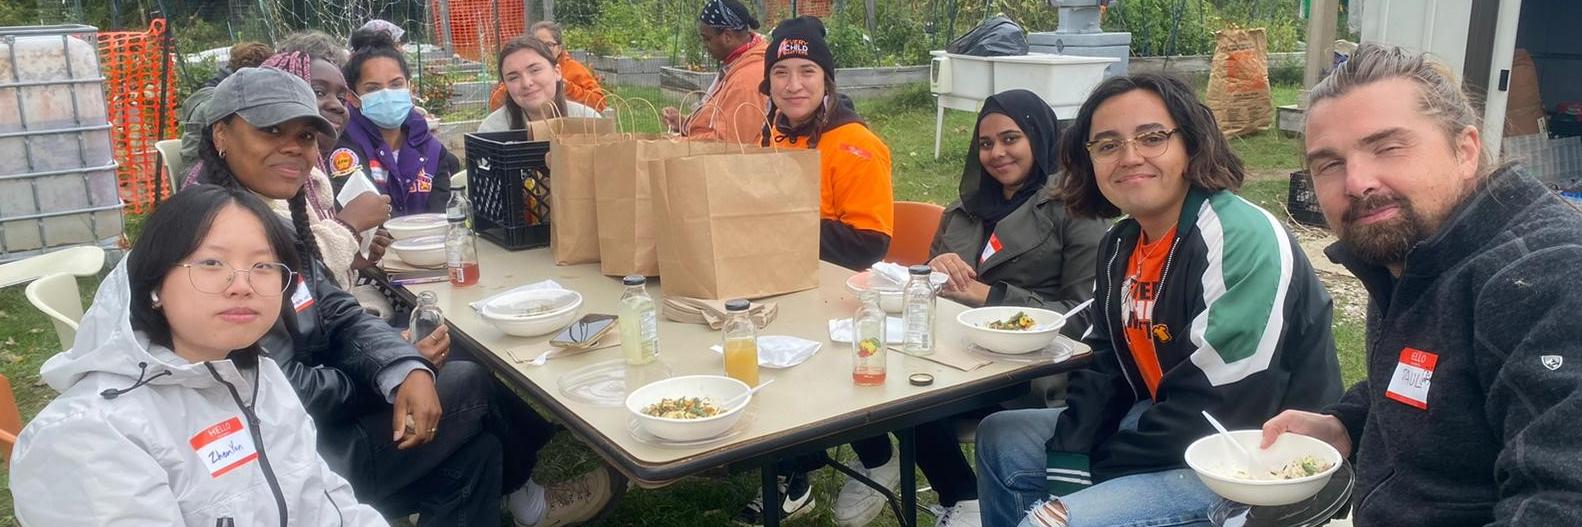 Students enjoy lunch at Indigenous Garden